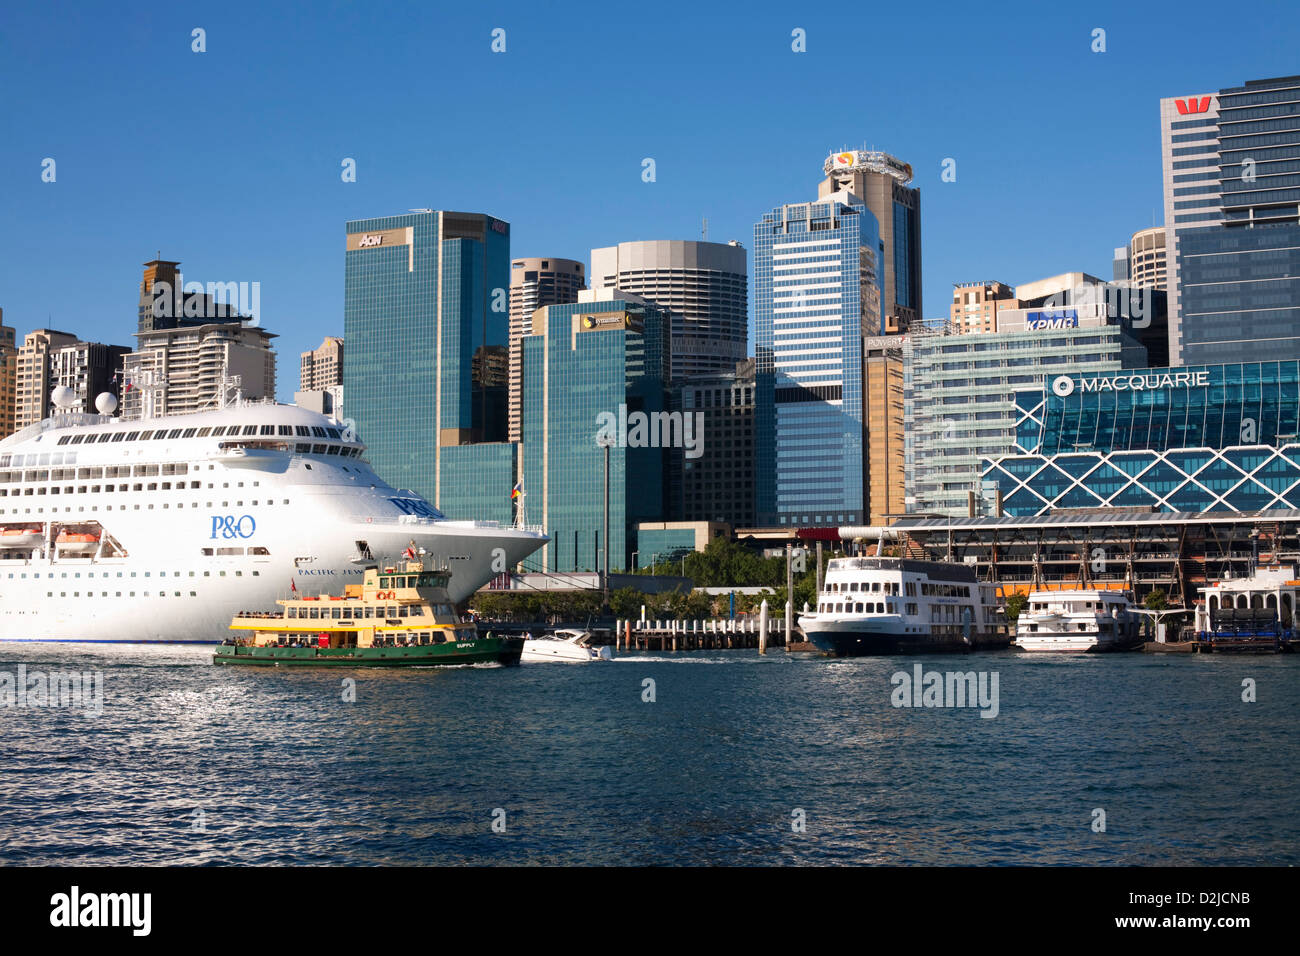 P&O Cruises superliner Pacific Jewel Cruise Ship berthed at Wharf 8 Darling Harbour Sydney Australia Stock Photo